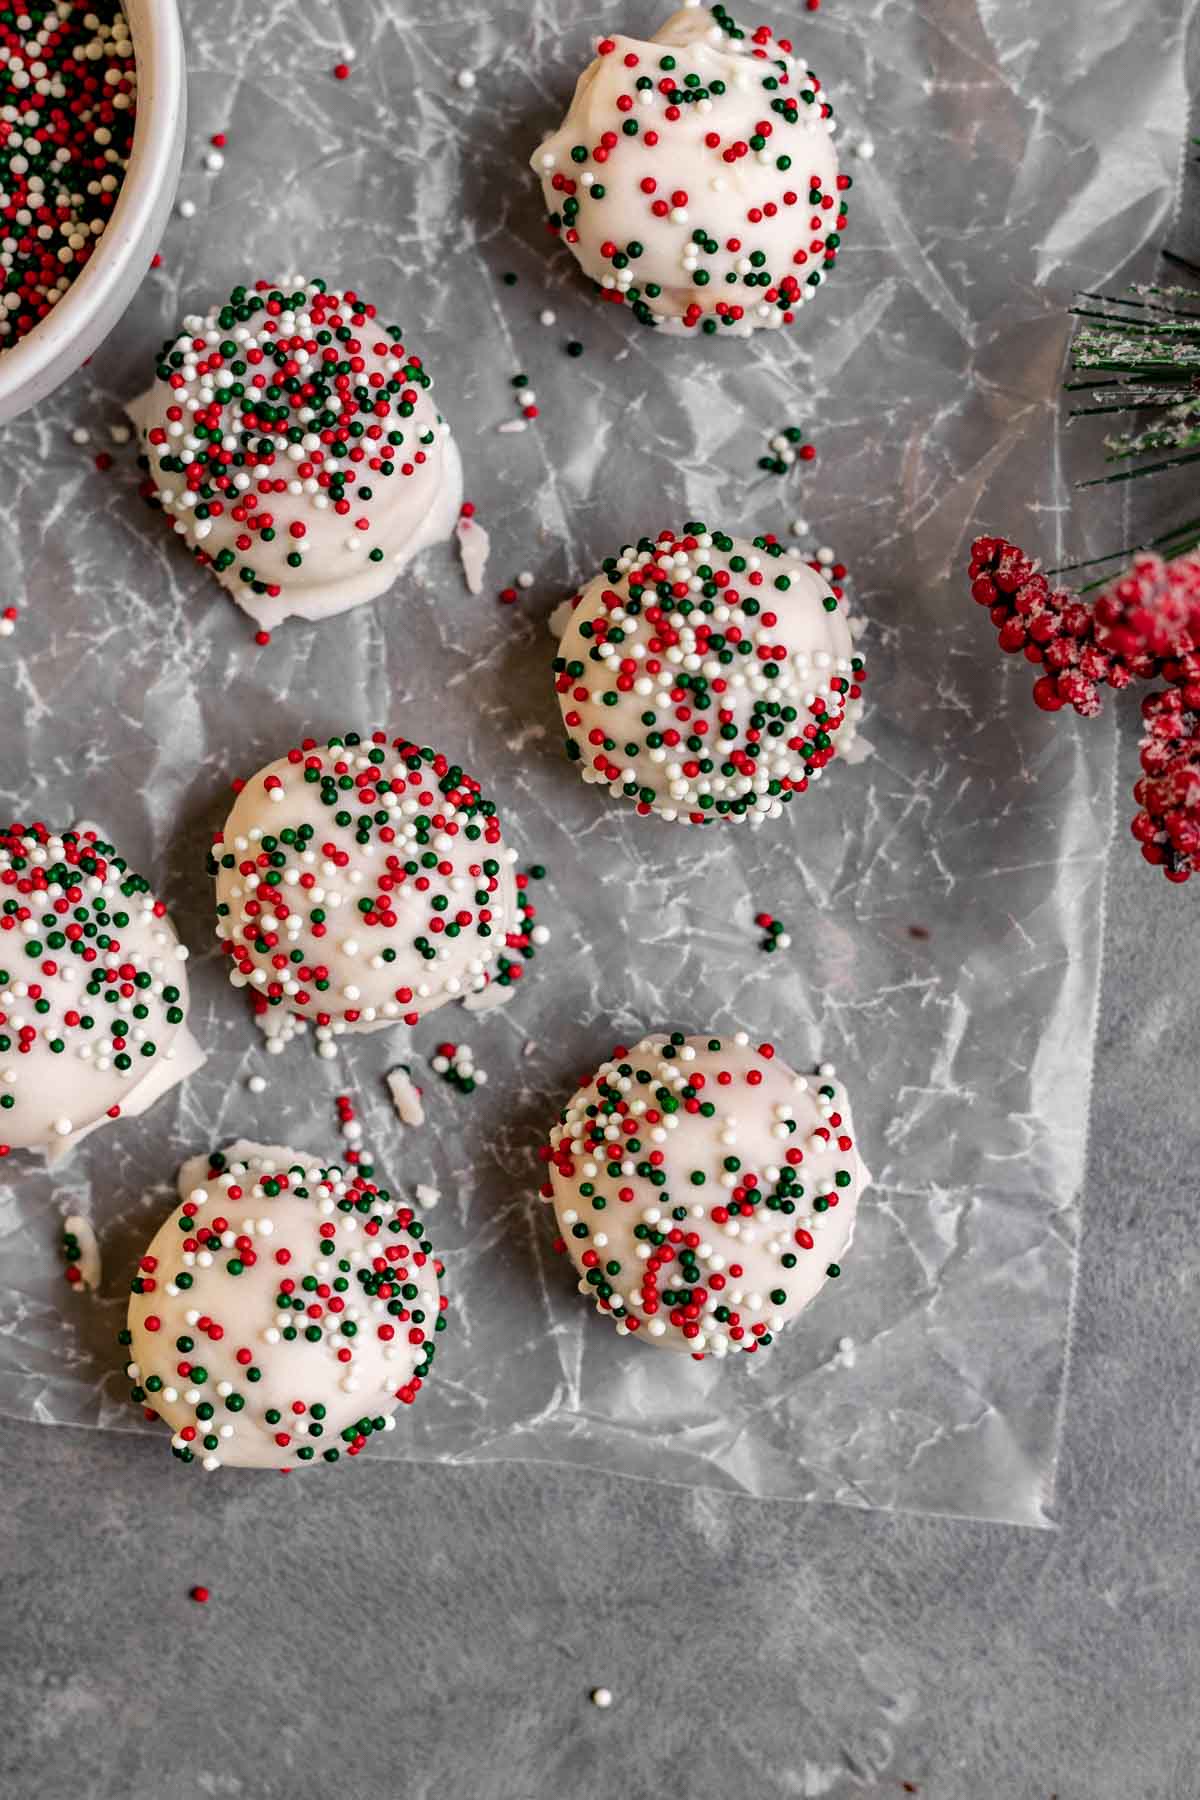 Peanut Butter Snowballs covered in white chocolate and holiday sprinkles on parchment